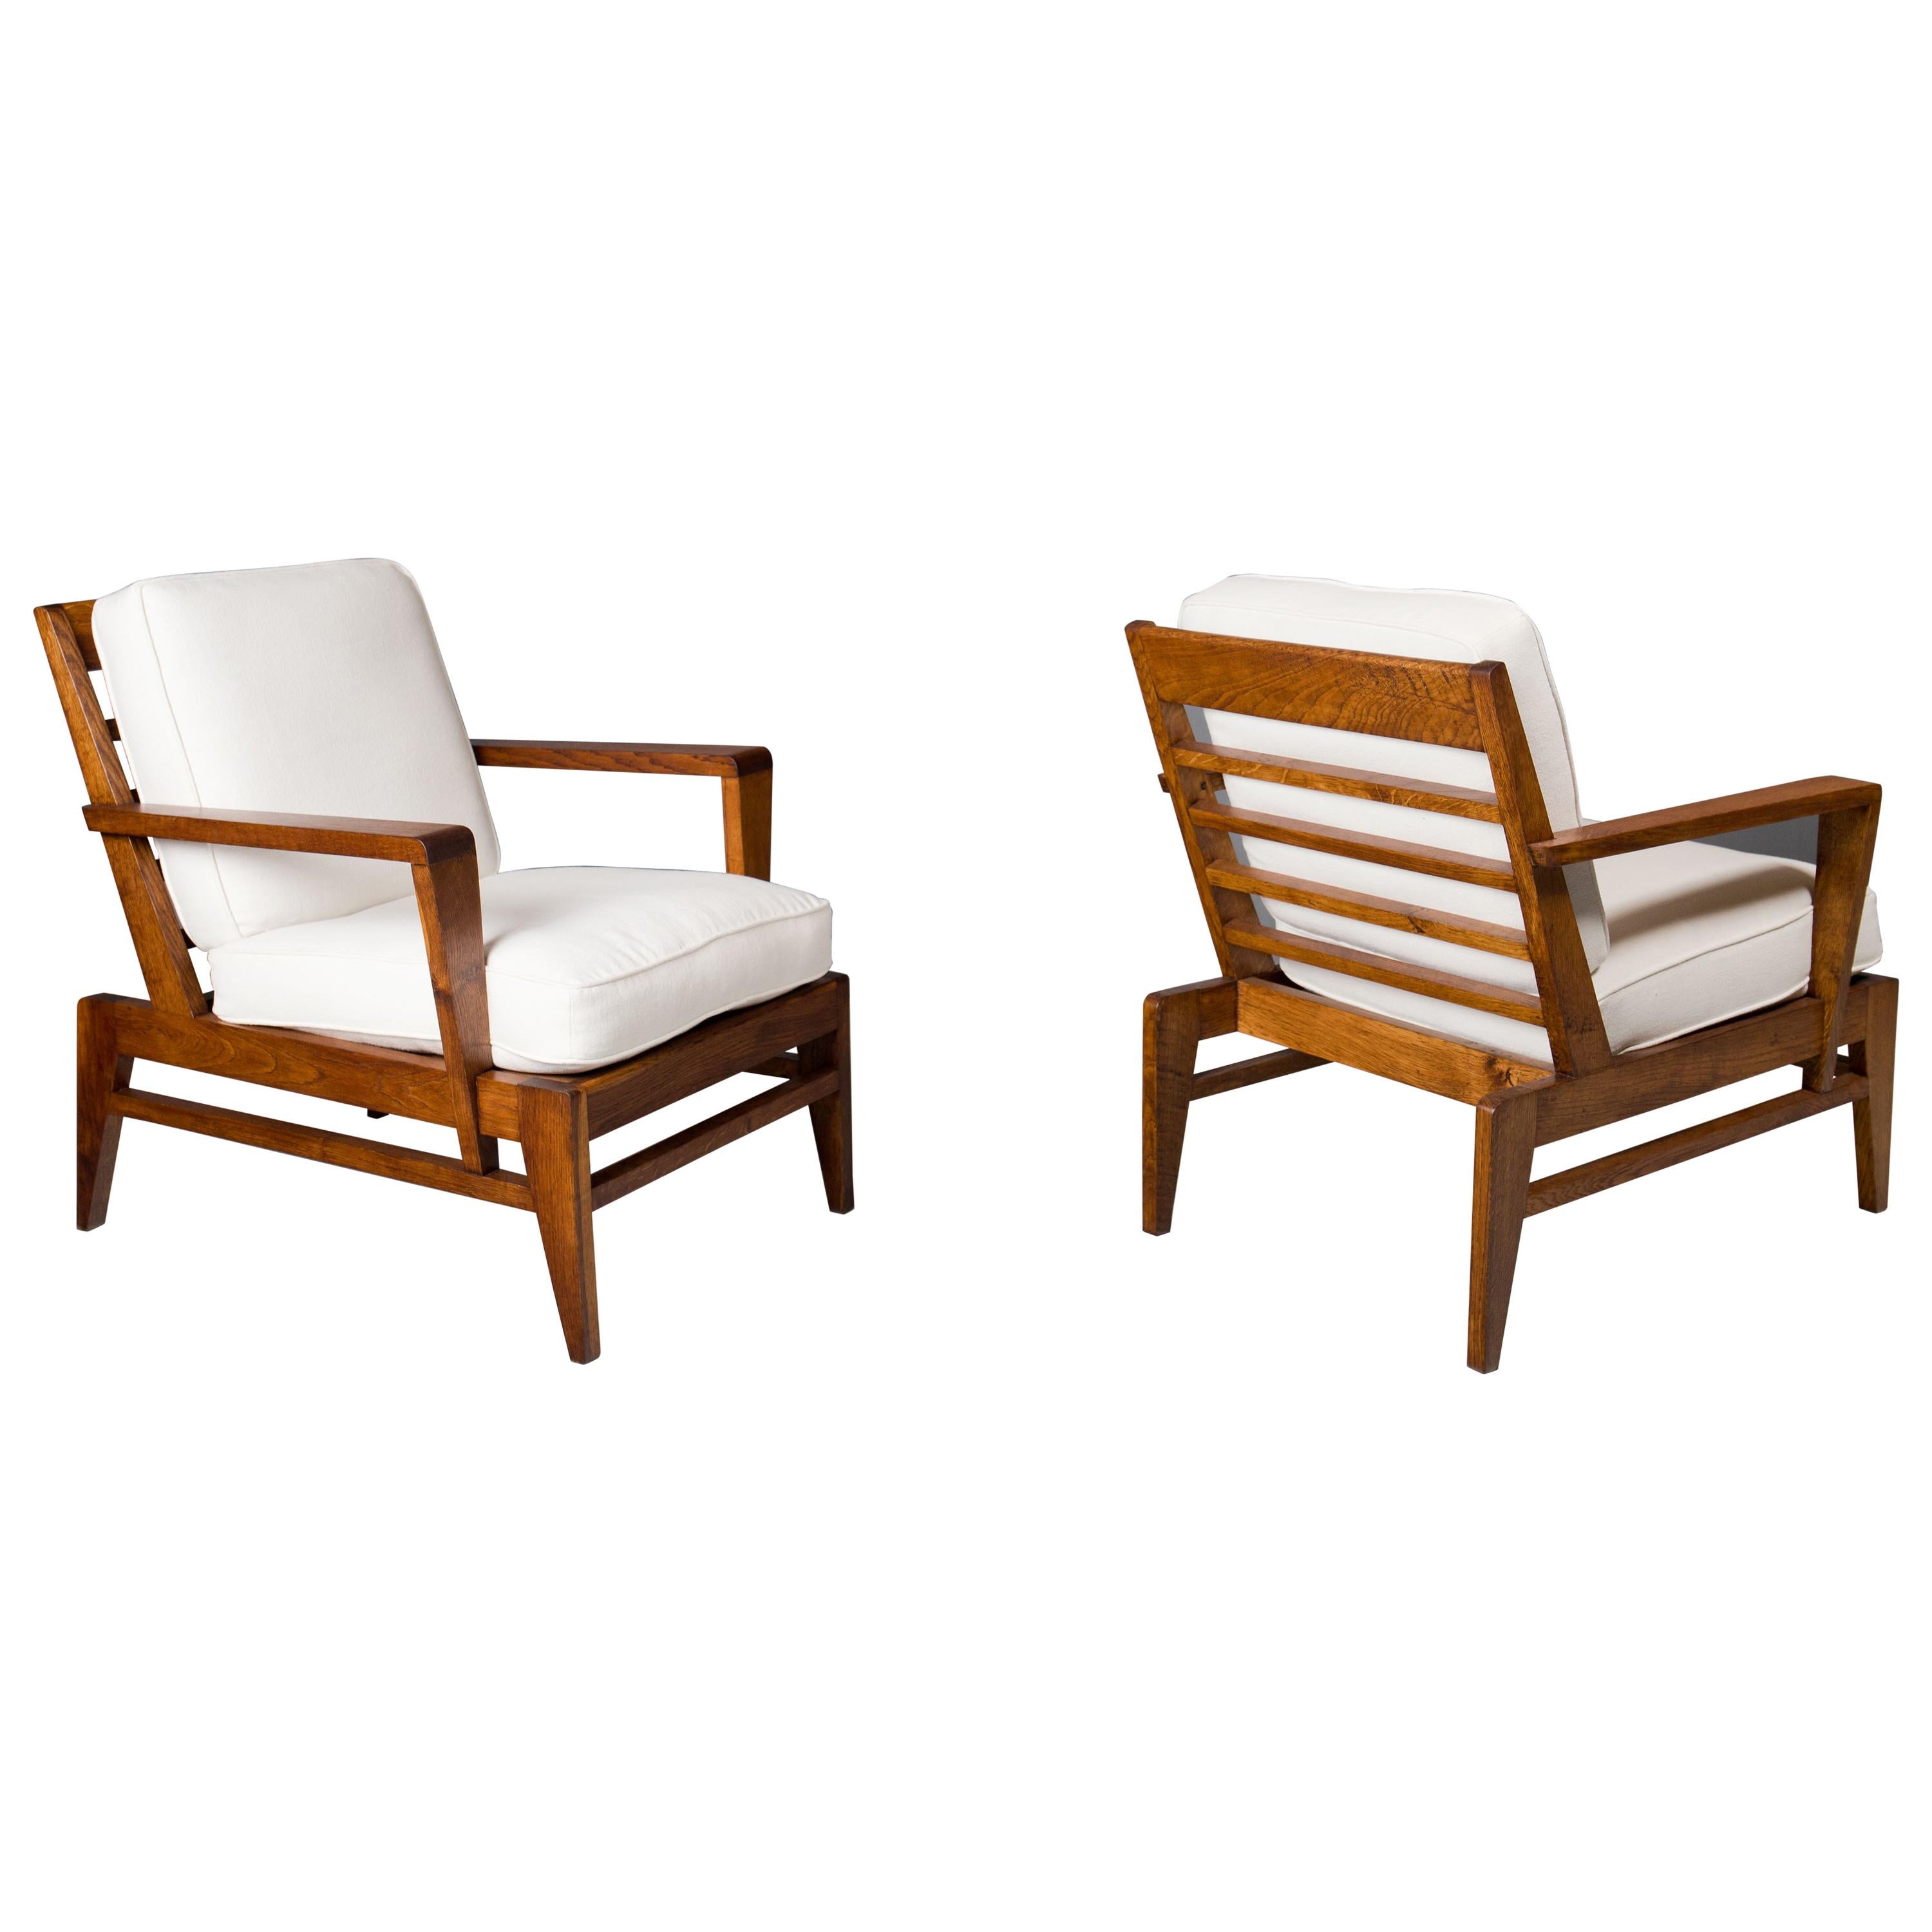 Great French, mid century lounge chairs by Rene Gabriel, ca 1950s.
Frames have been newly refinished with oil rubbed finish and original horsehair cushions have been recovered in white linen.